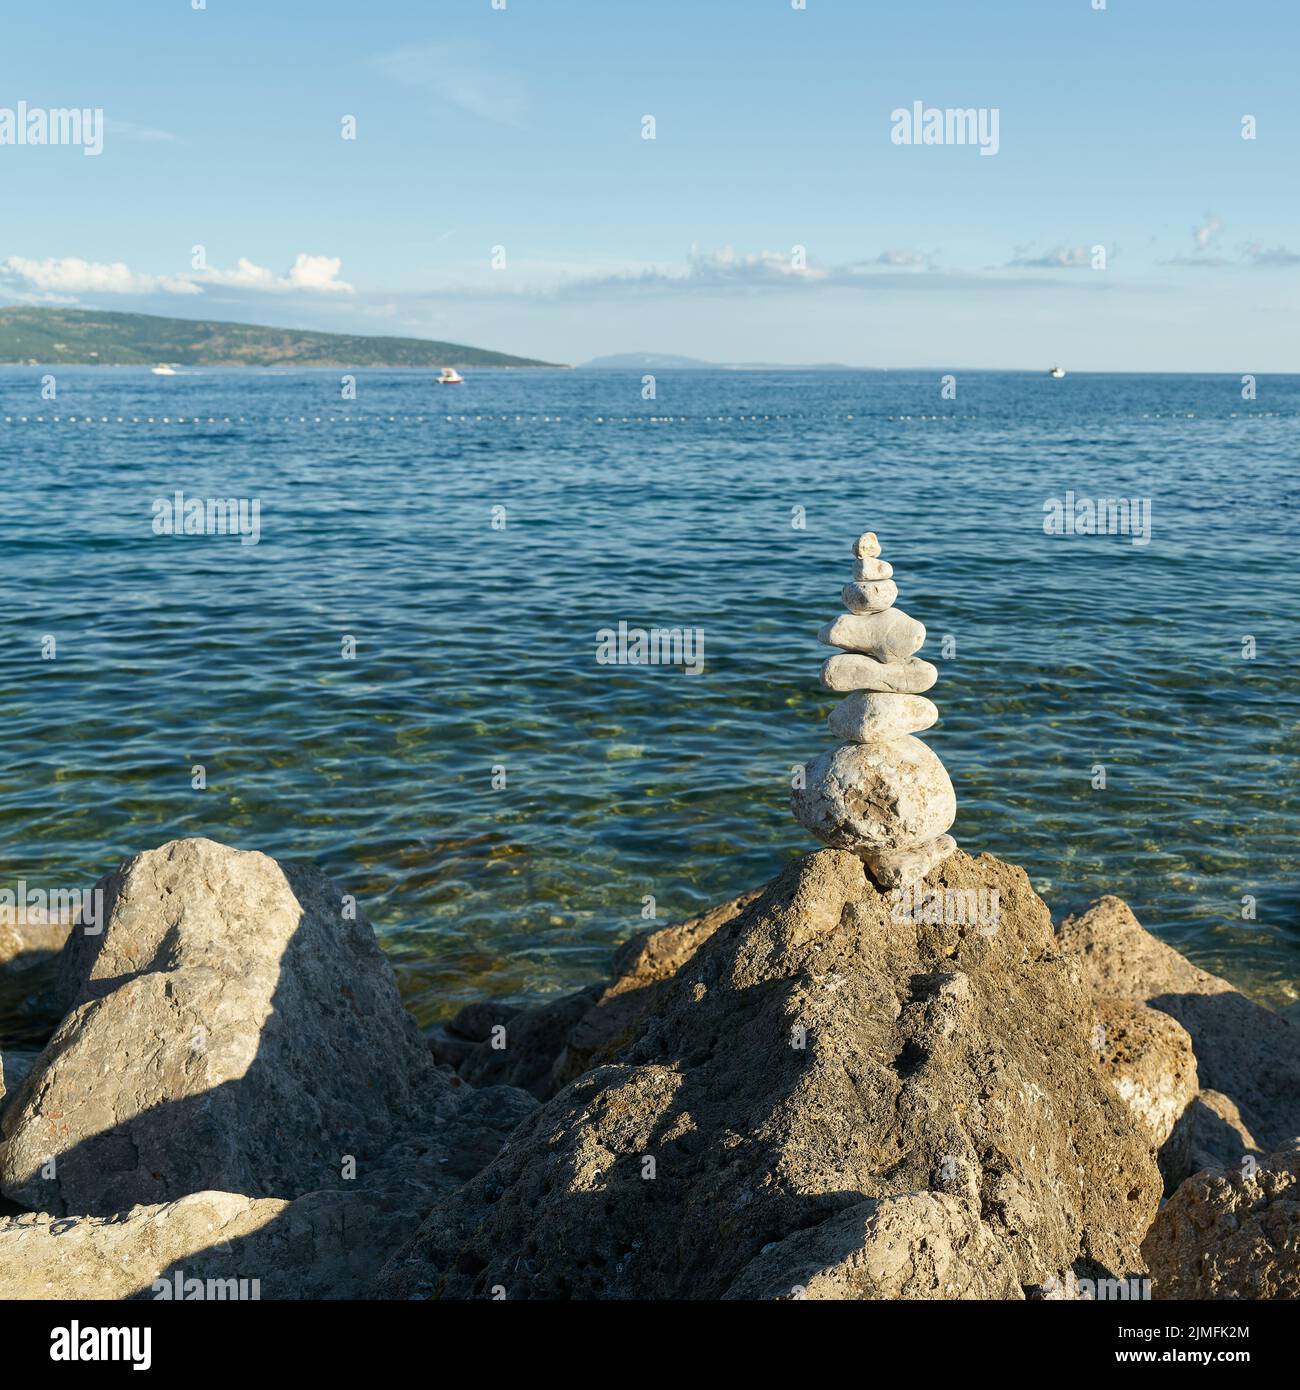 Piled up stones and beautiful view of the Adriatic Sea near the town of Krk in Croatia Stock Photo